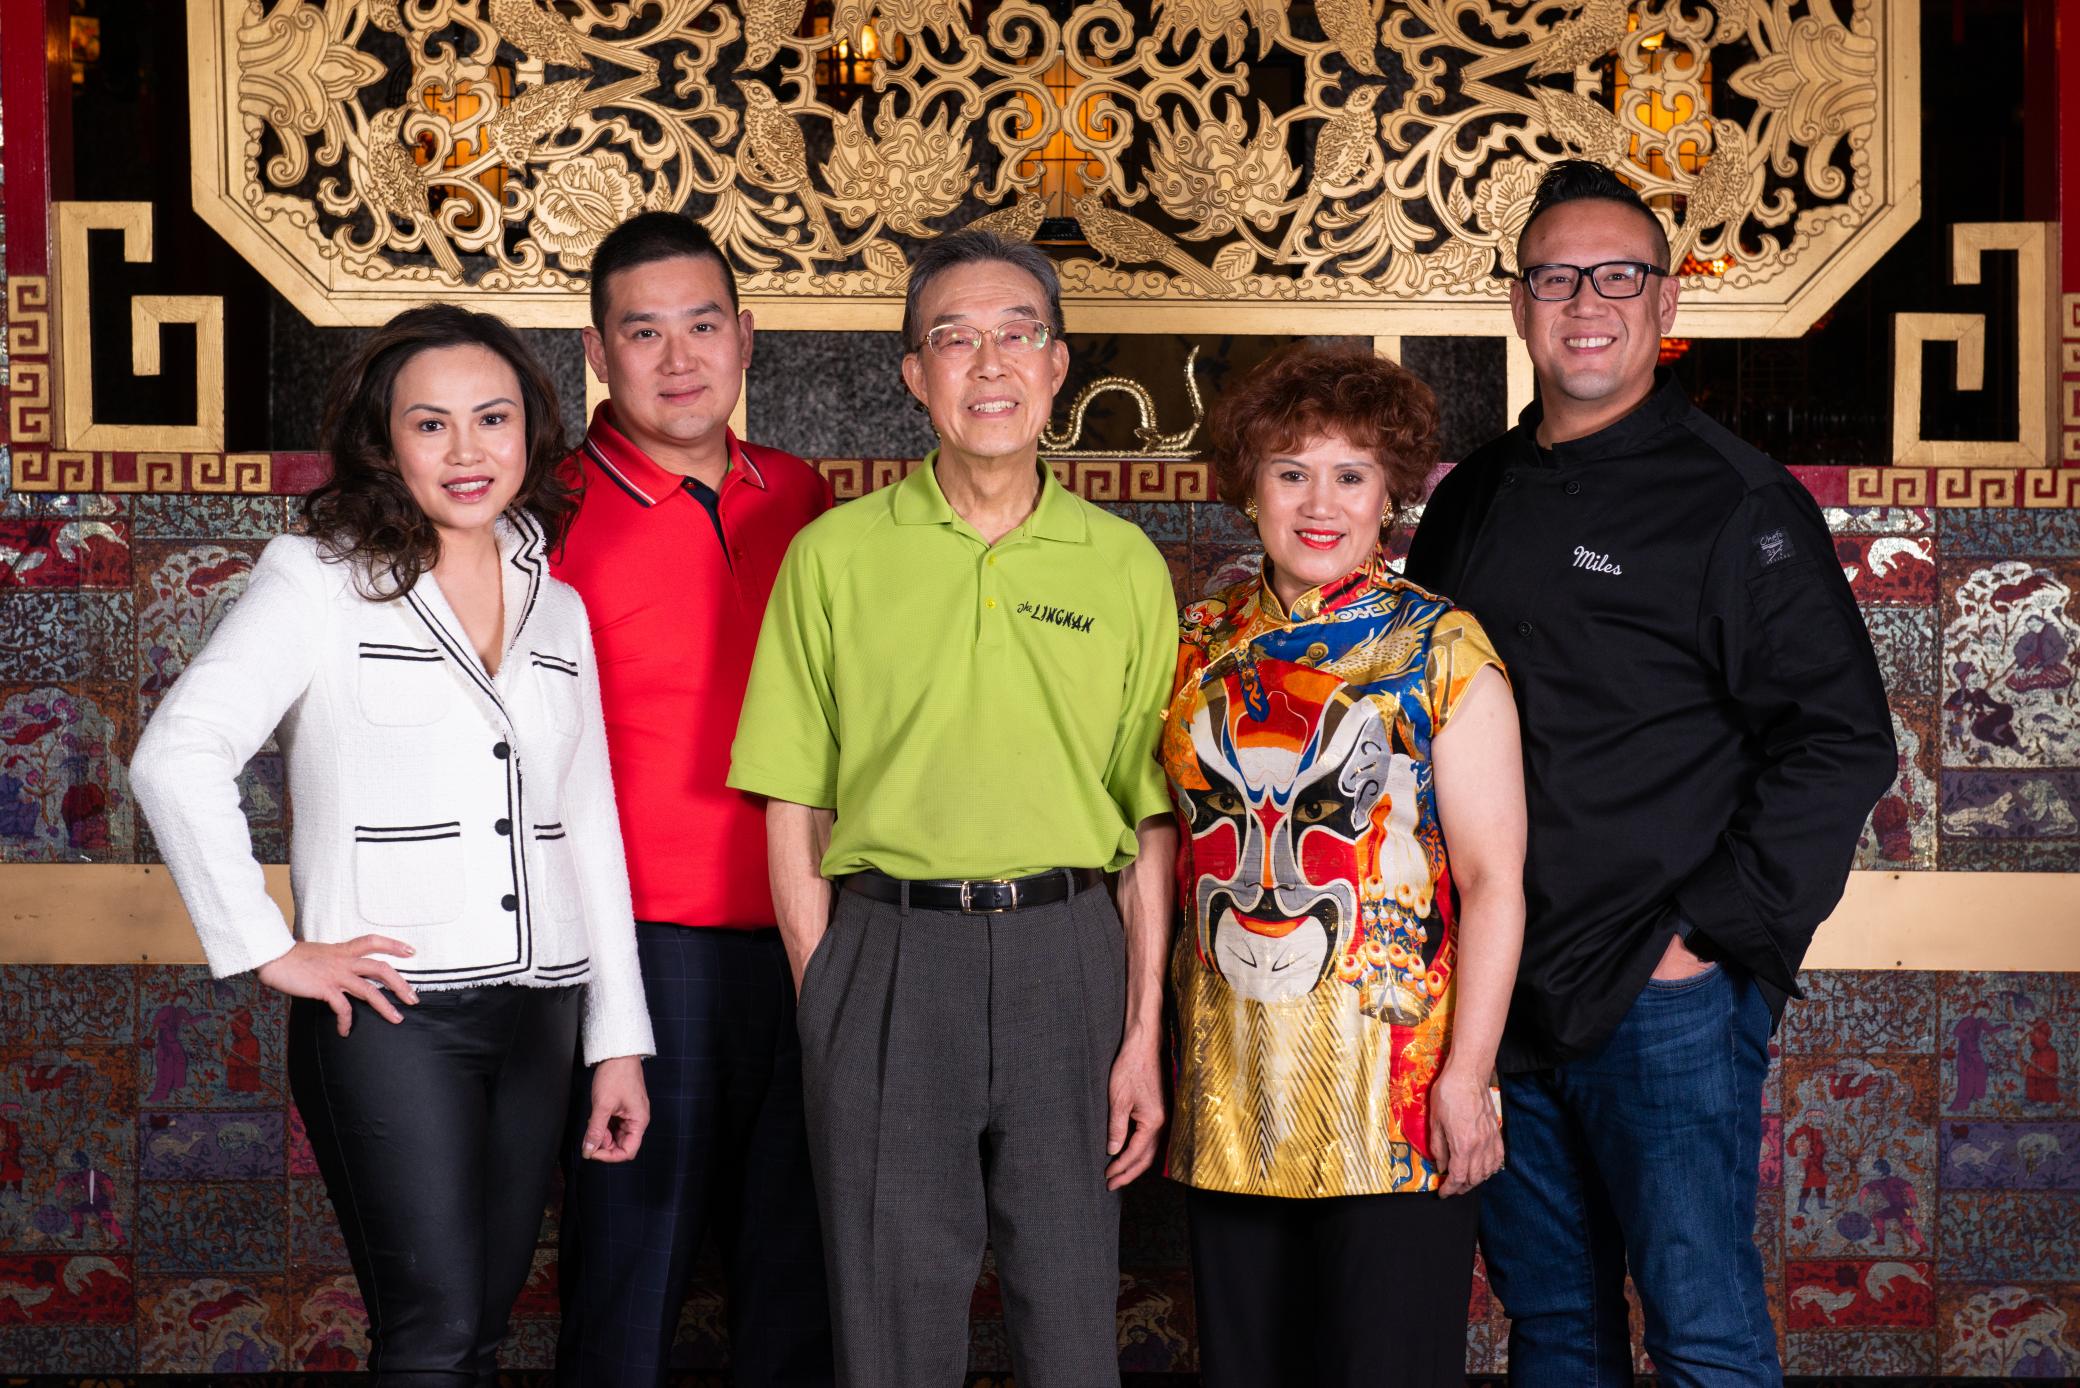 The Quon family posing for a photo inside of their restaurant, The Lingnan.